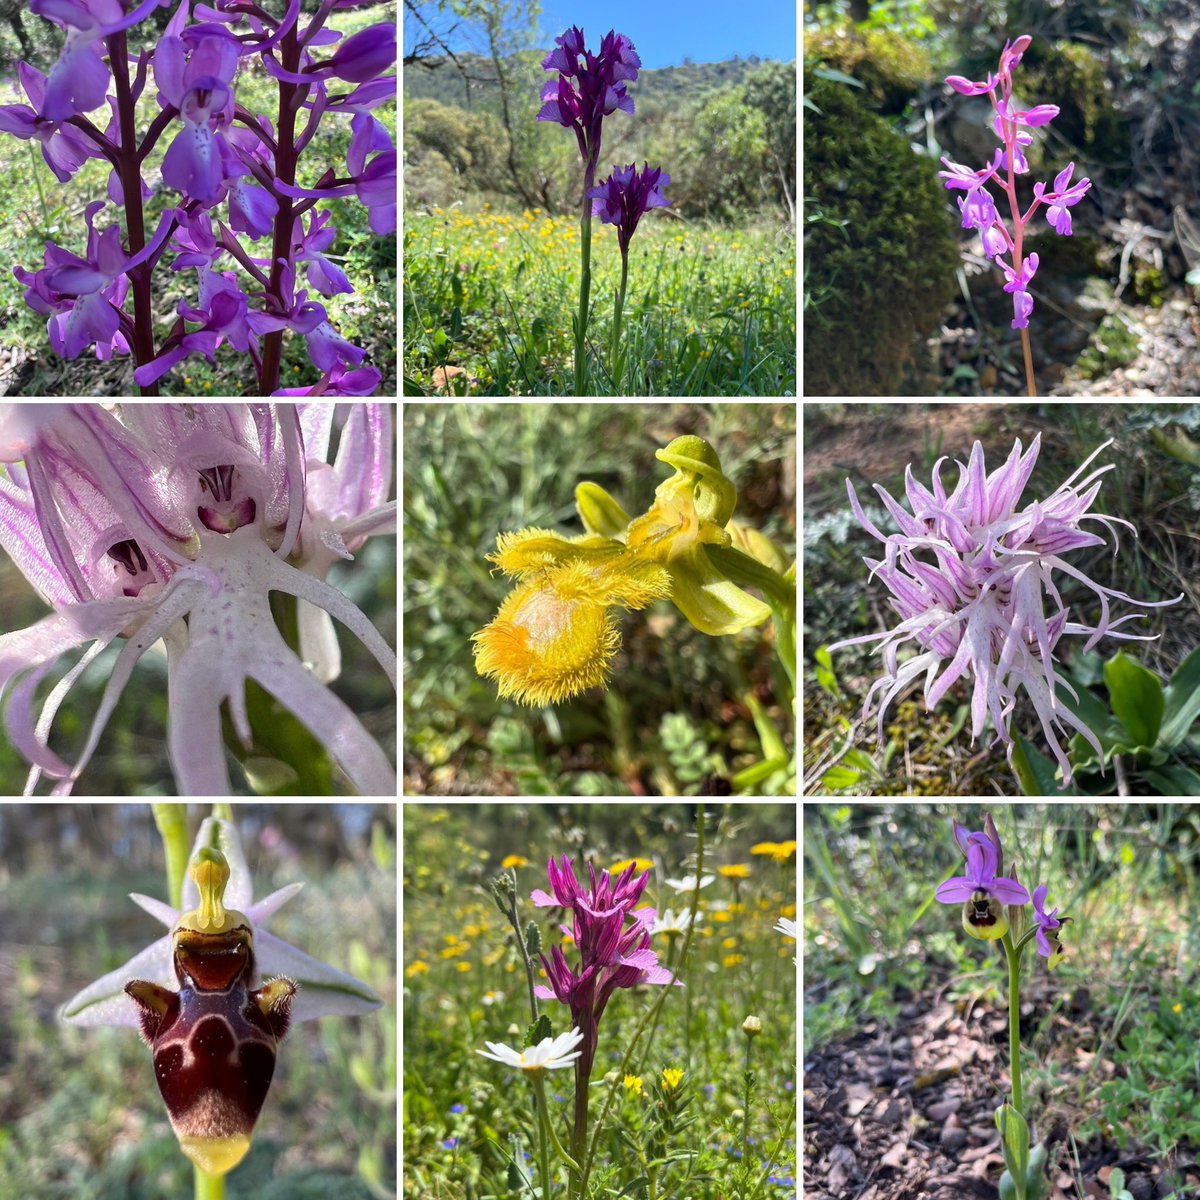 Some fabulous orchids today Naked Man orchid, orchis Langei and Ophrys Ficalhoana were new ones for me. The pink butterfly orchids were stunning and the rare hypochromic mirror orchid was a surprise. It’s going to be hard to pick a favourite @lojawildlife @EuropeanOrchids 🇪🇸